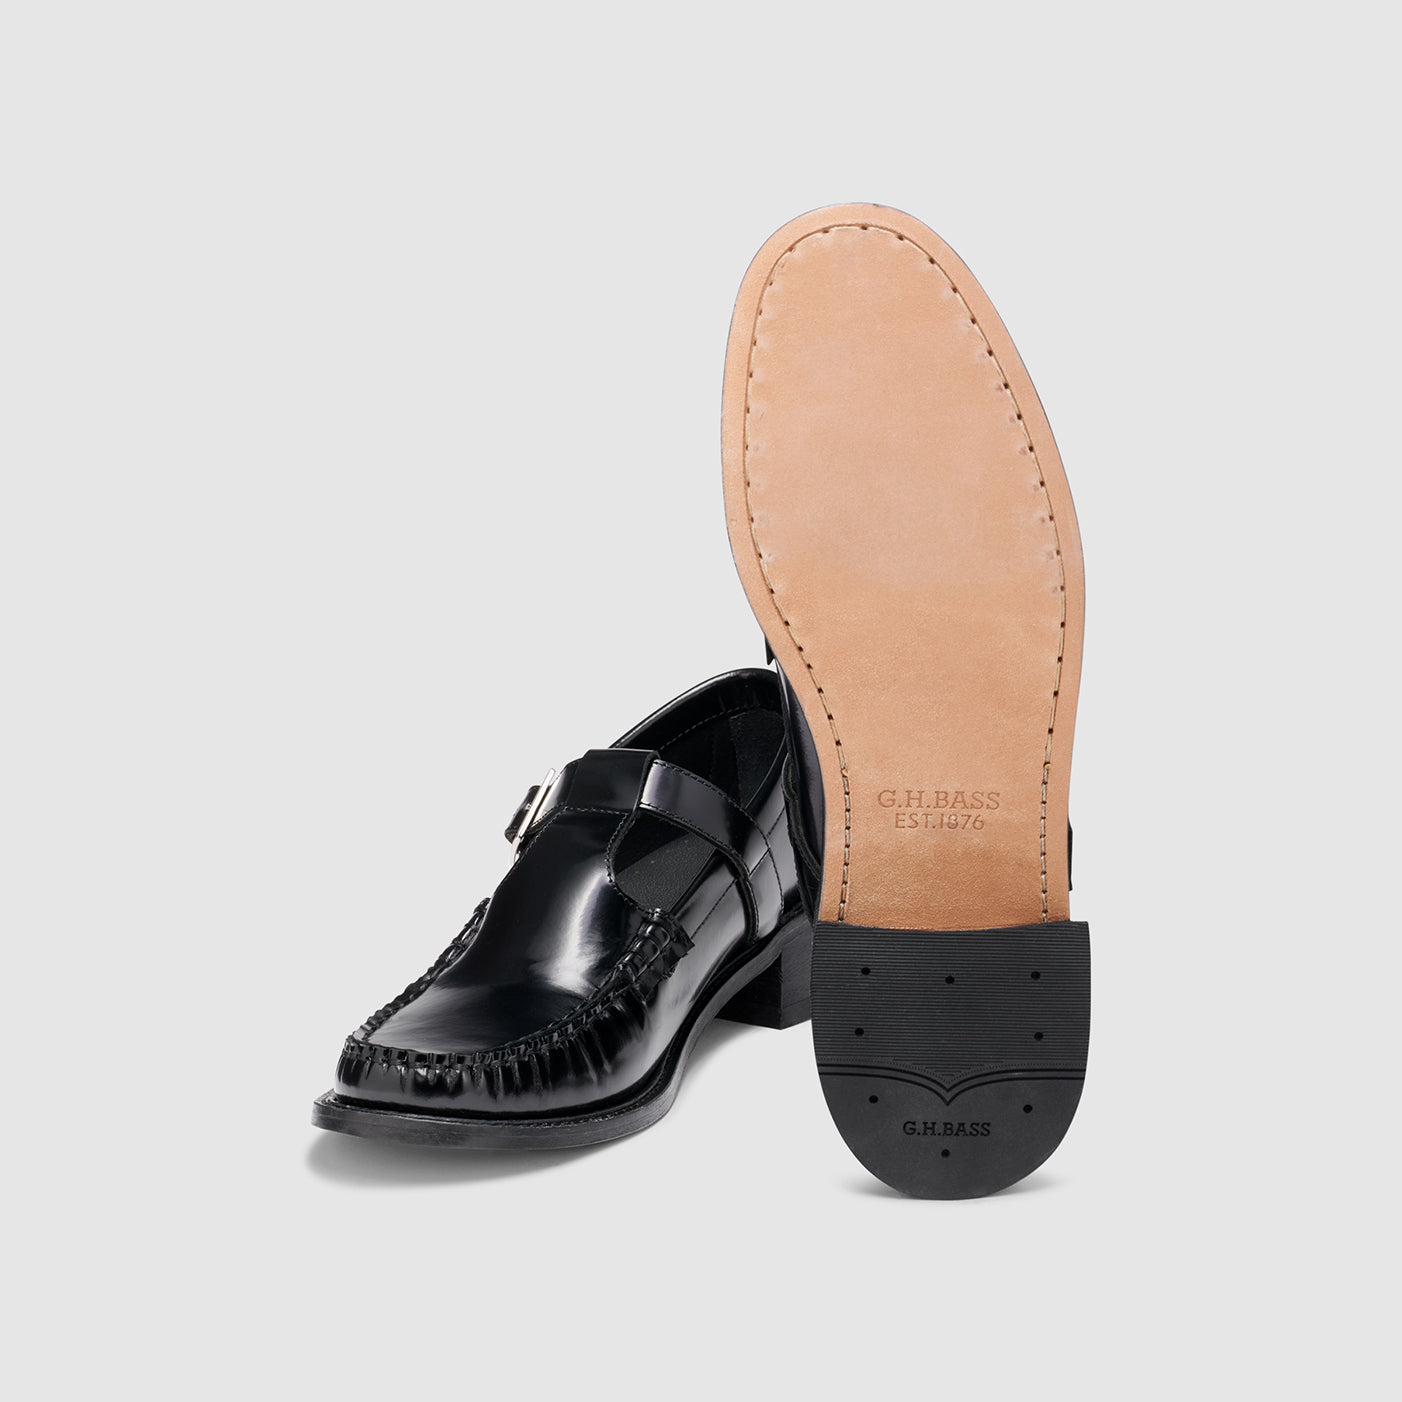 WOMENS MARY JANE HEEL LOAFER